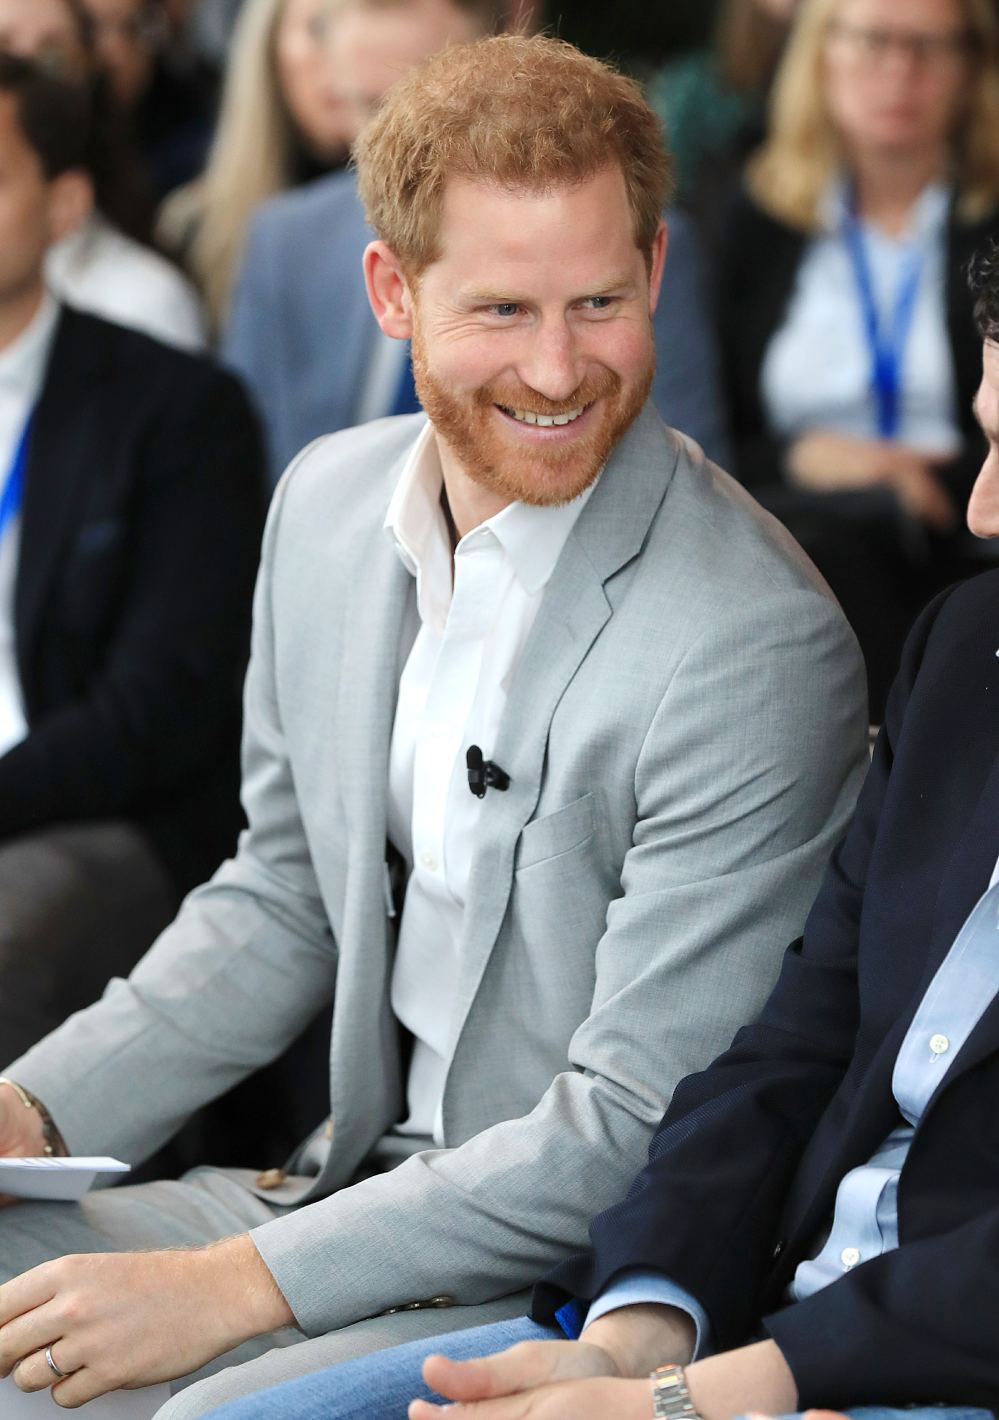 Prince Harry Travalyst Press Release Can Be Planted